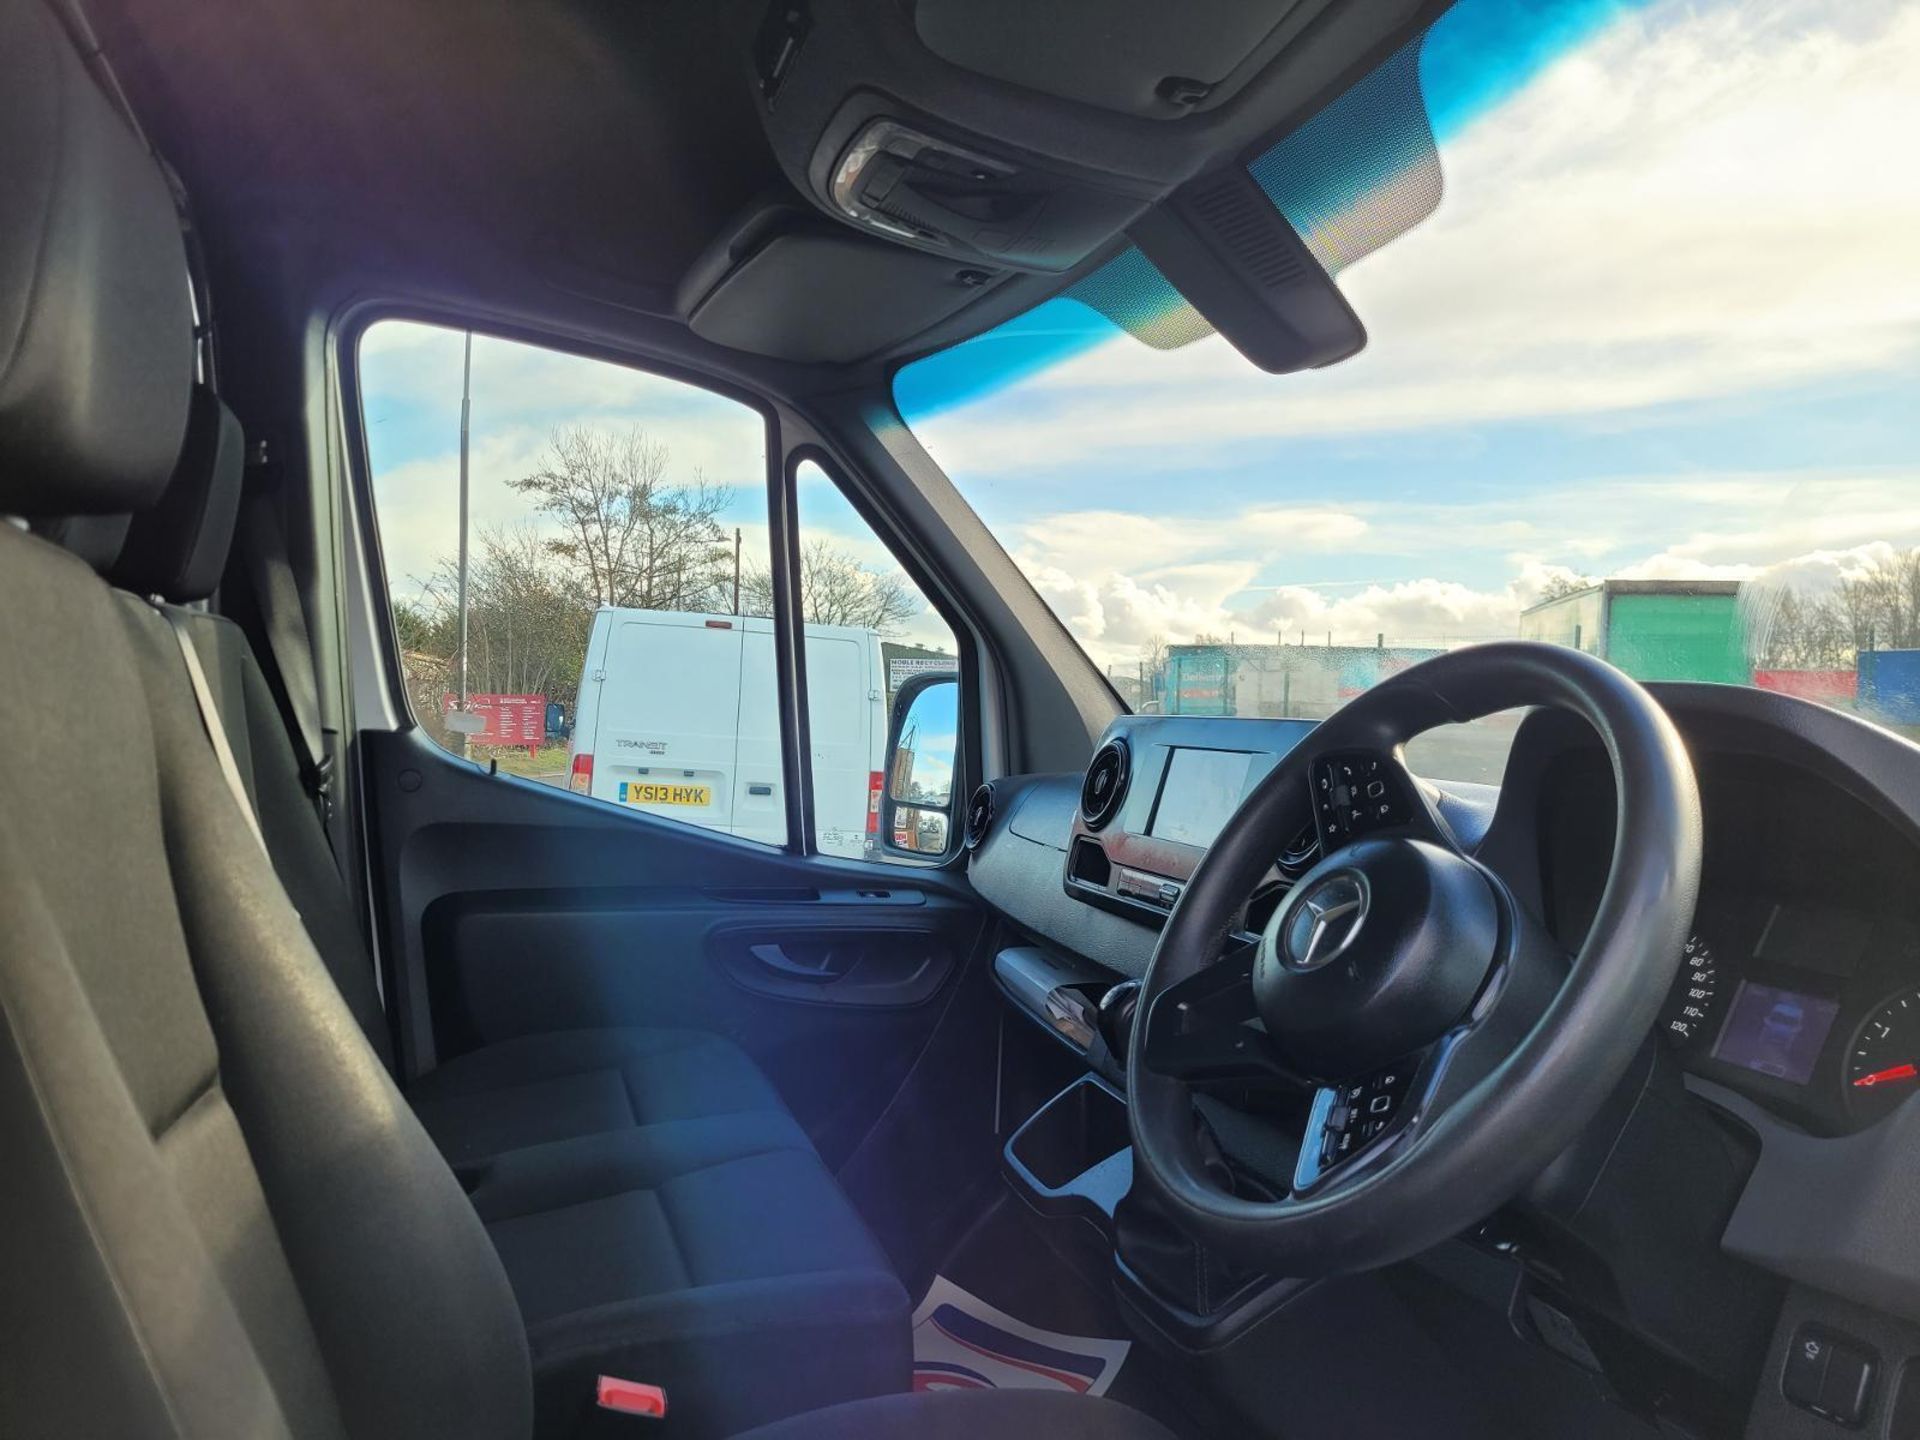 MERCEDES-BENZ SPRINTER 314 CDI *MWB - REFRIGERATED VAN* (2019 - FACELIFT MODEL) *AIR CONDITIONING* - Image 2 of 4